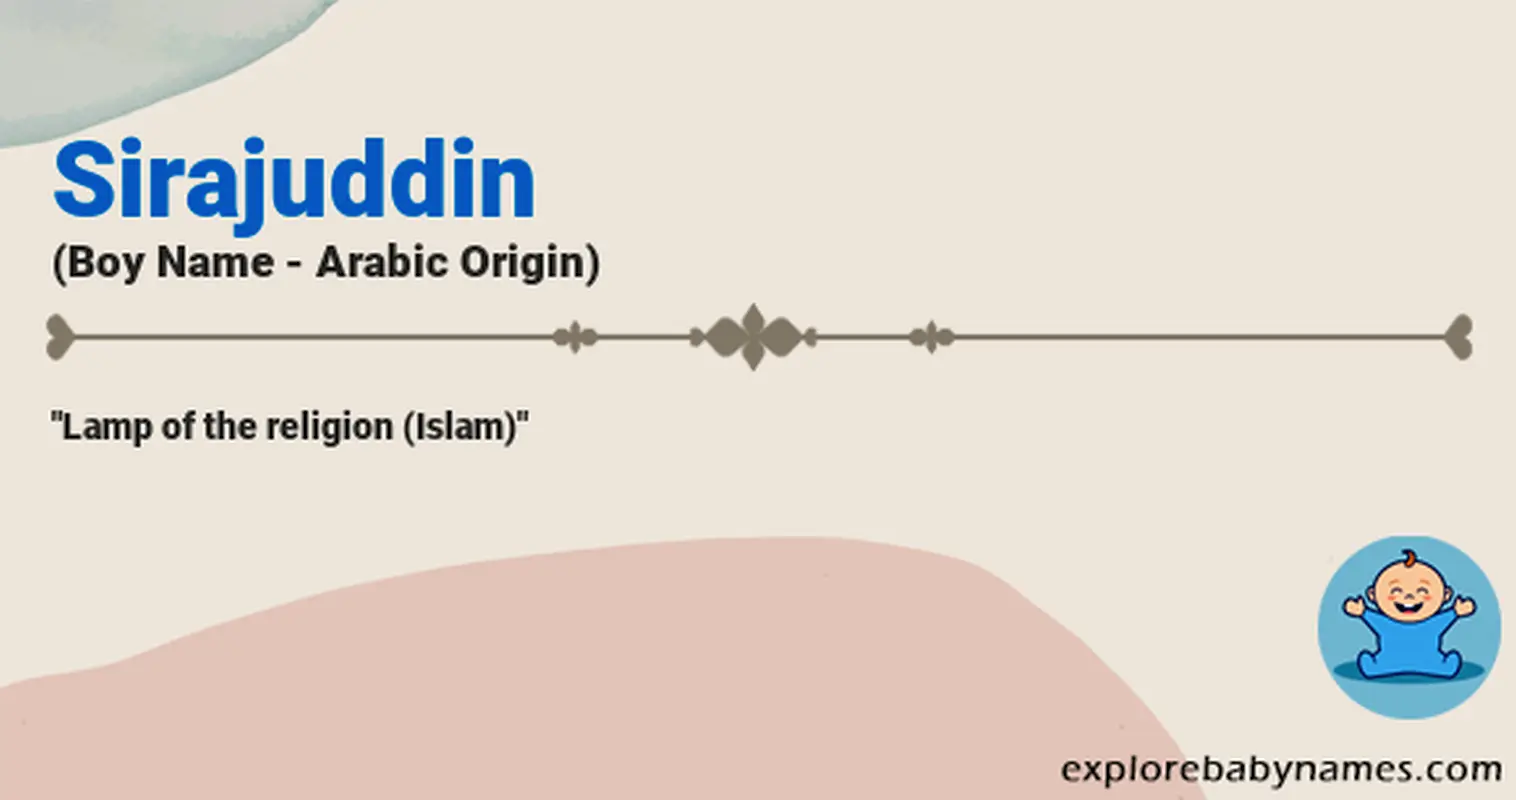 Meaning of Sirajuddin